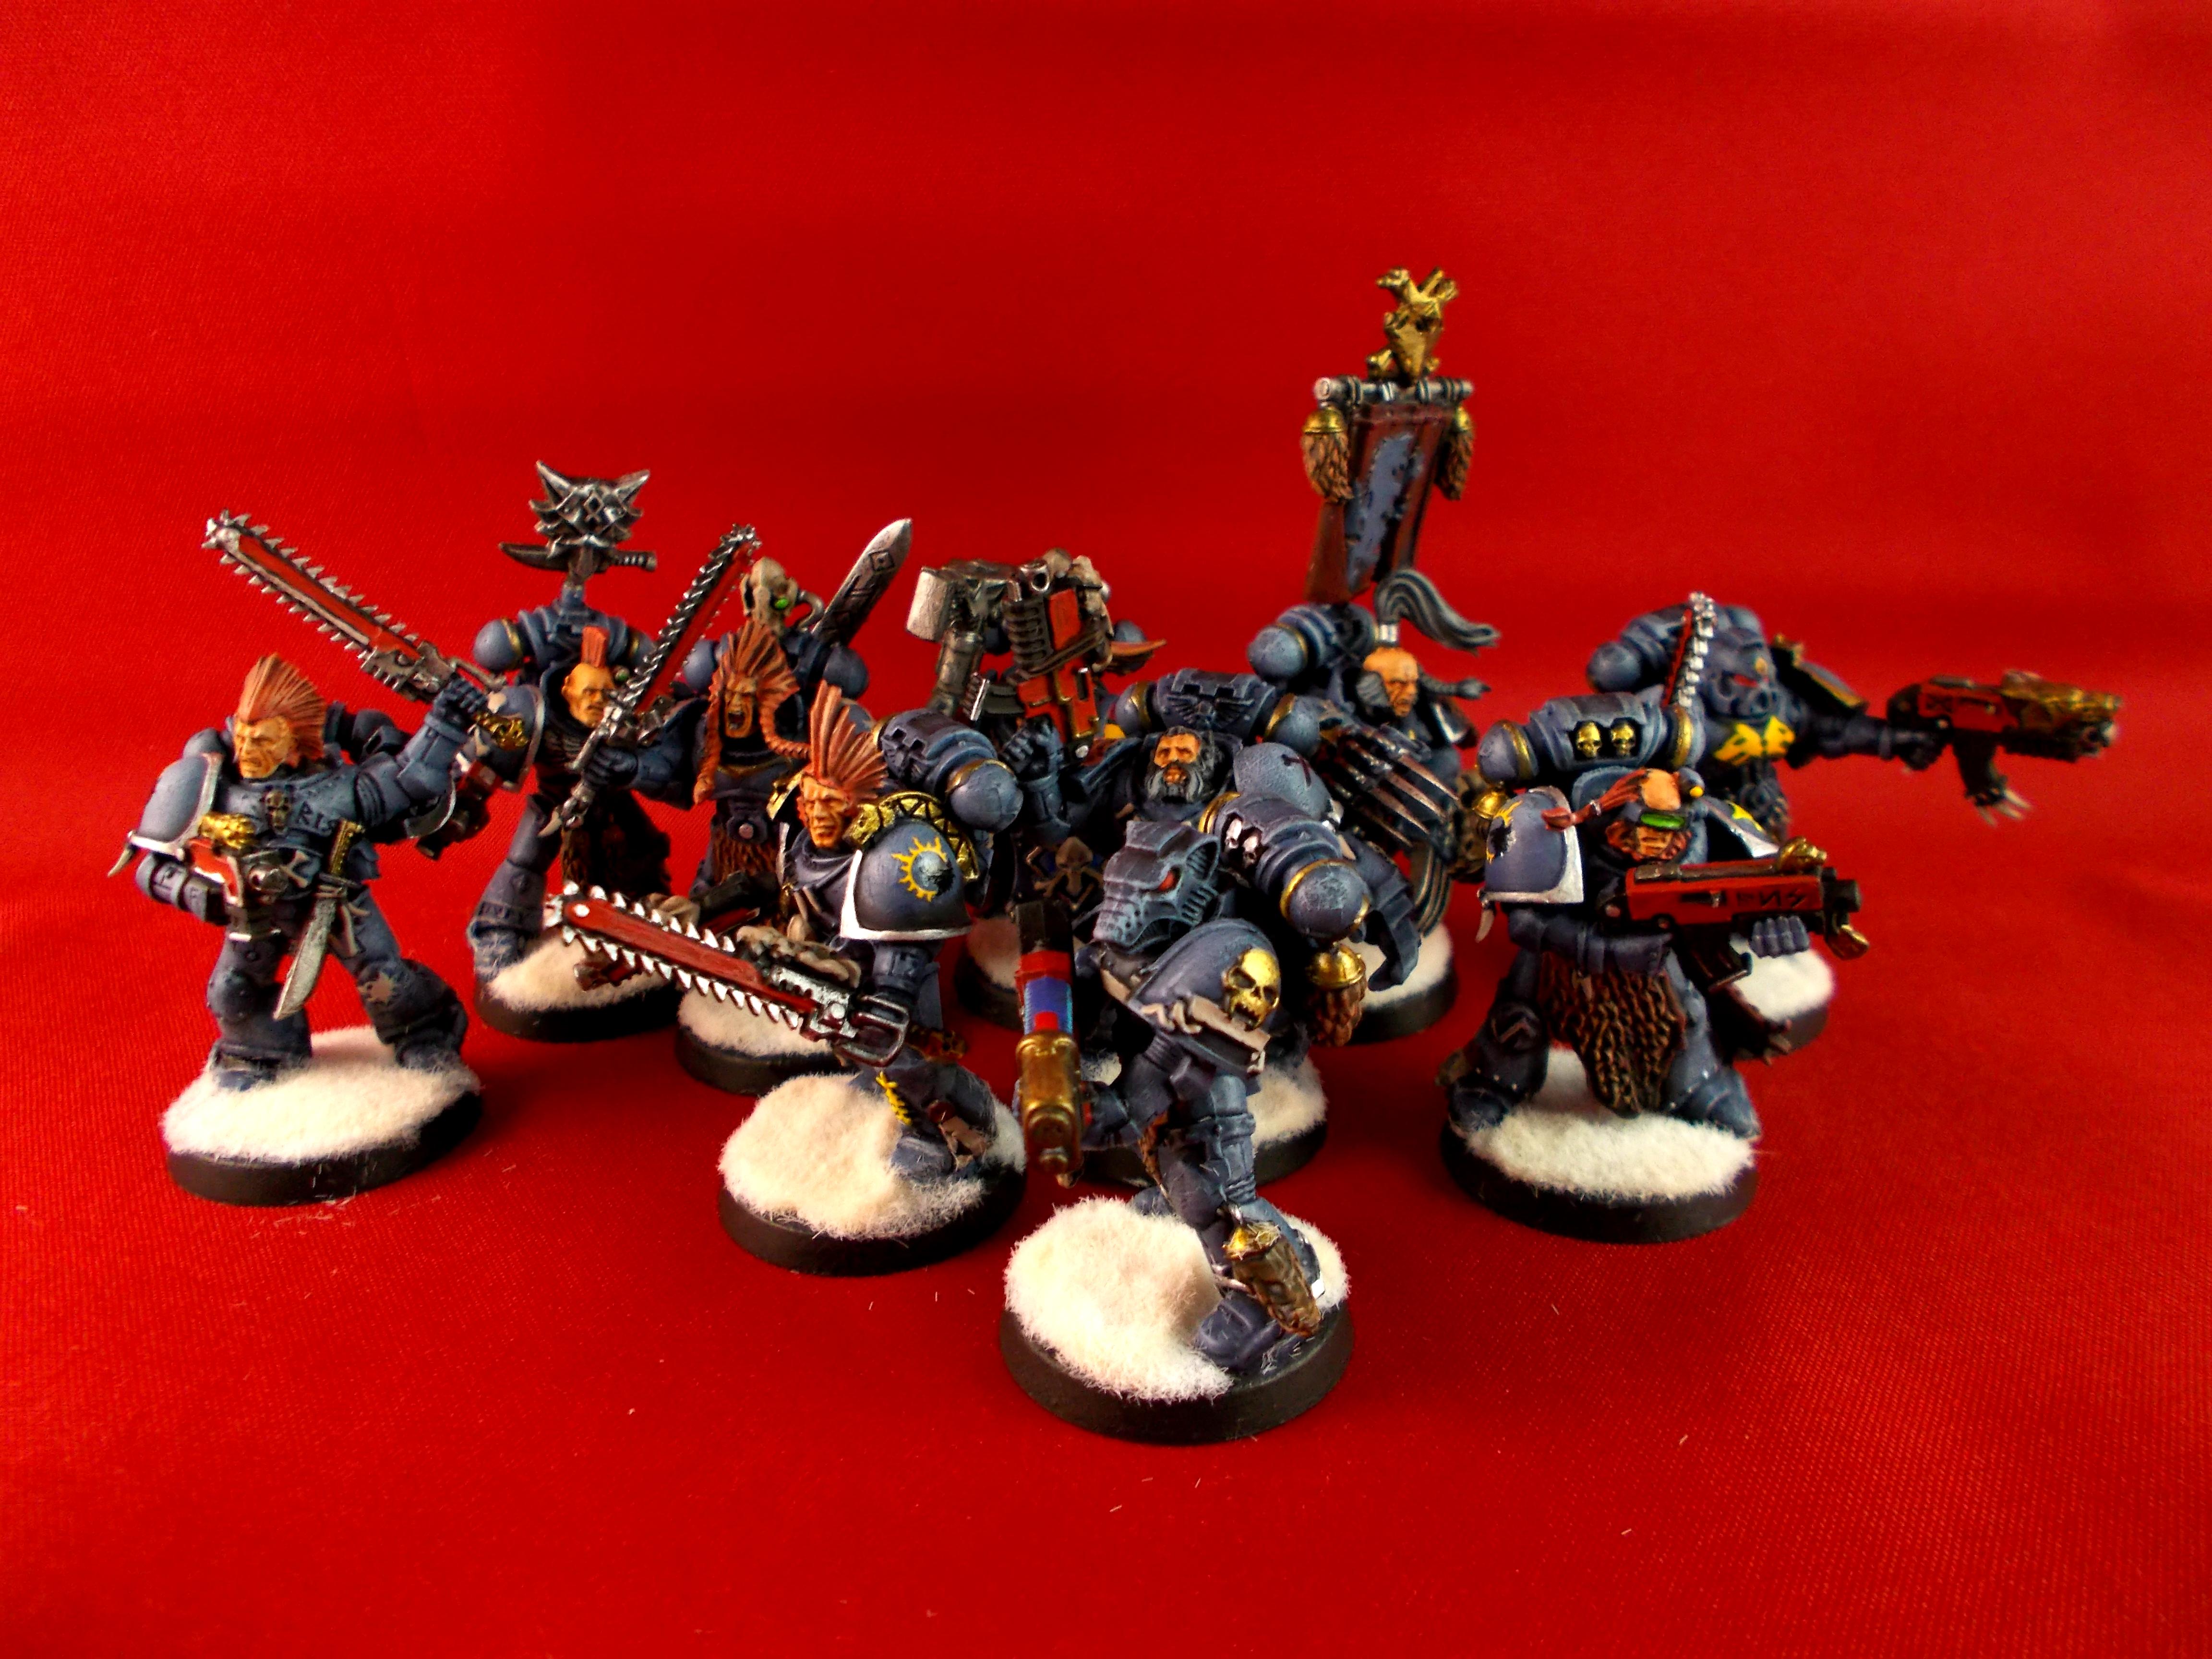 Bolters, Chainswords, Plasma Gun, Space Marines, Space Wolves, Warhammer 40,000